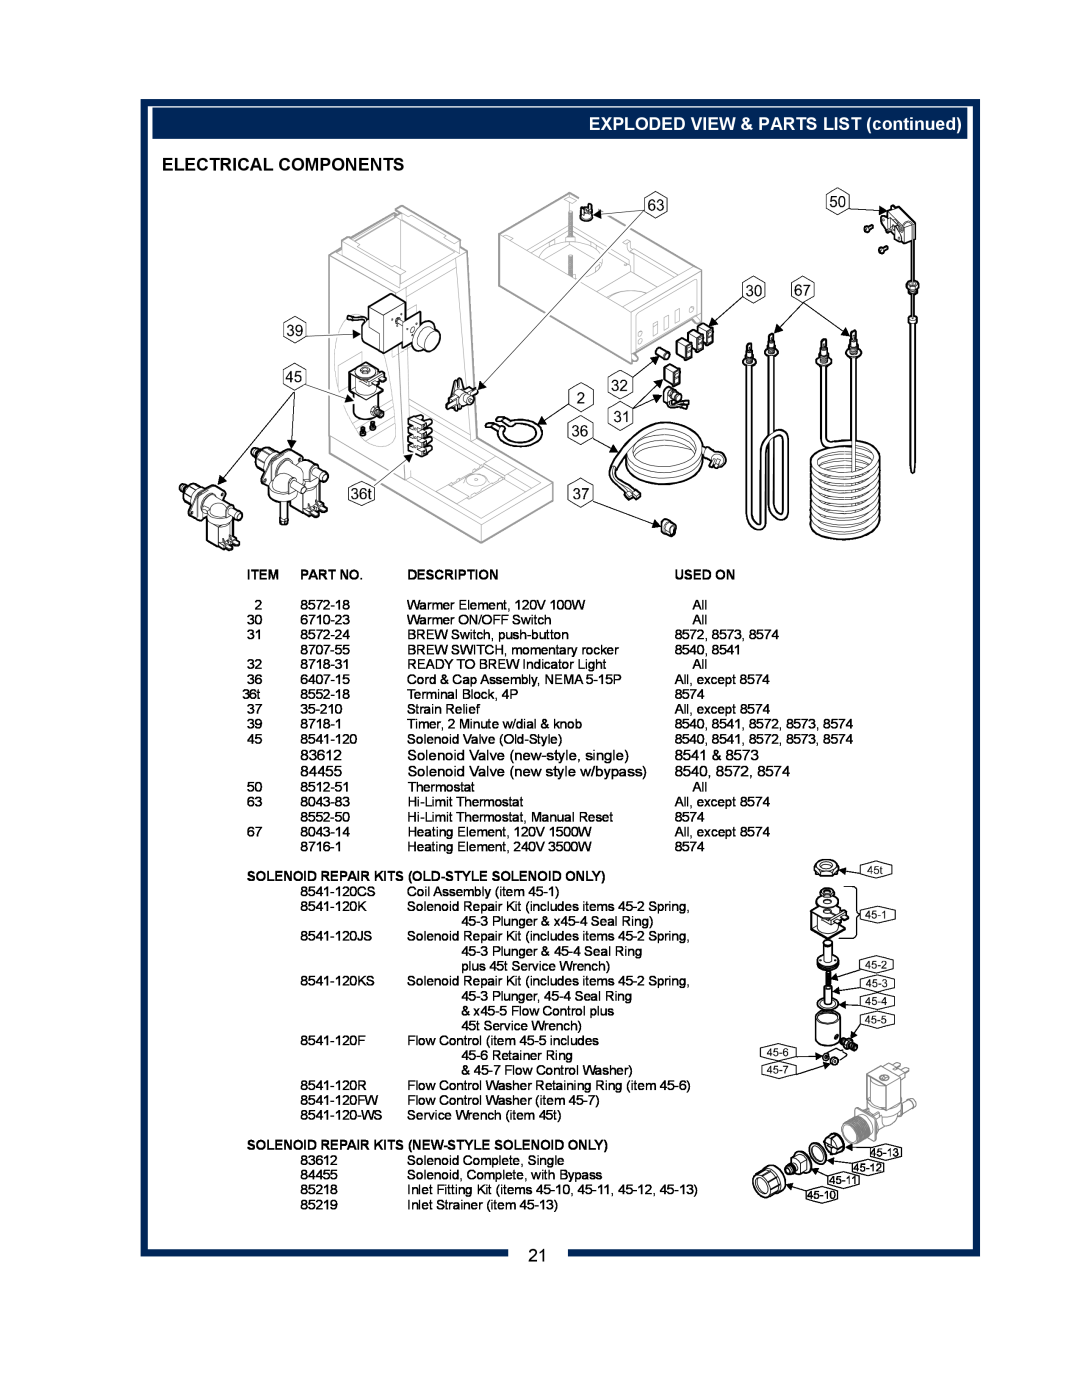 Bloomfield 8574, 8540, 8541, 8542, 8573 Electrical Components, EXPLODED VIEW & PARTS LIST continued, Description, Used On 